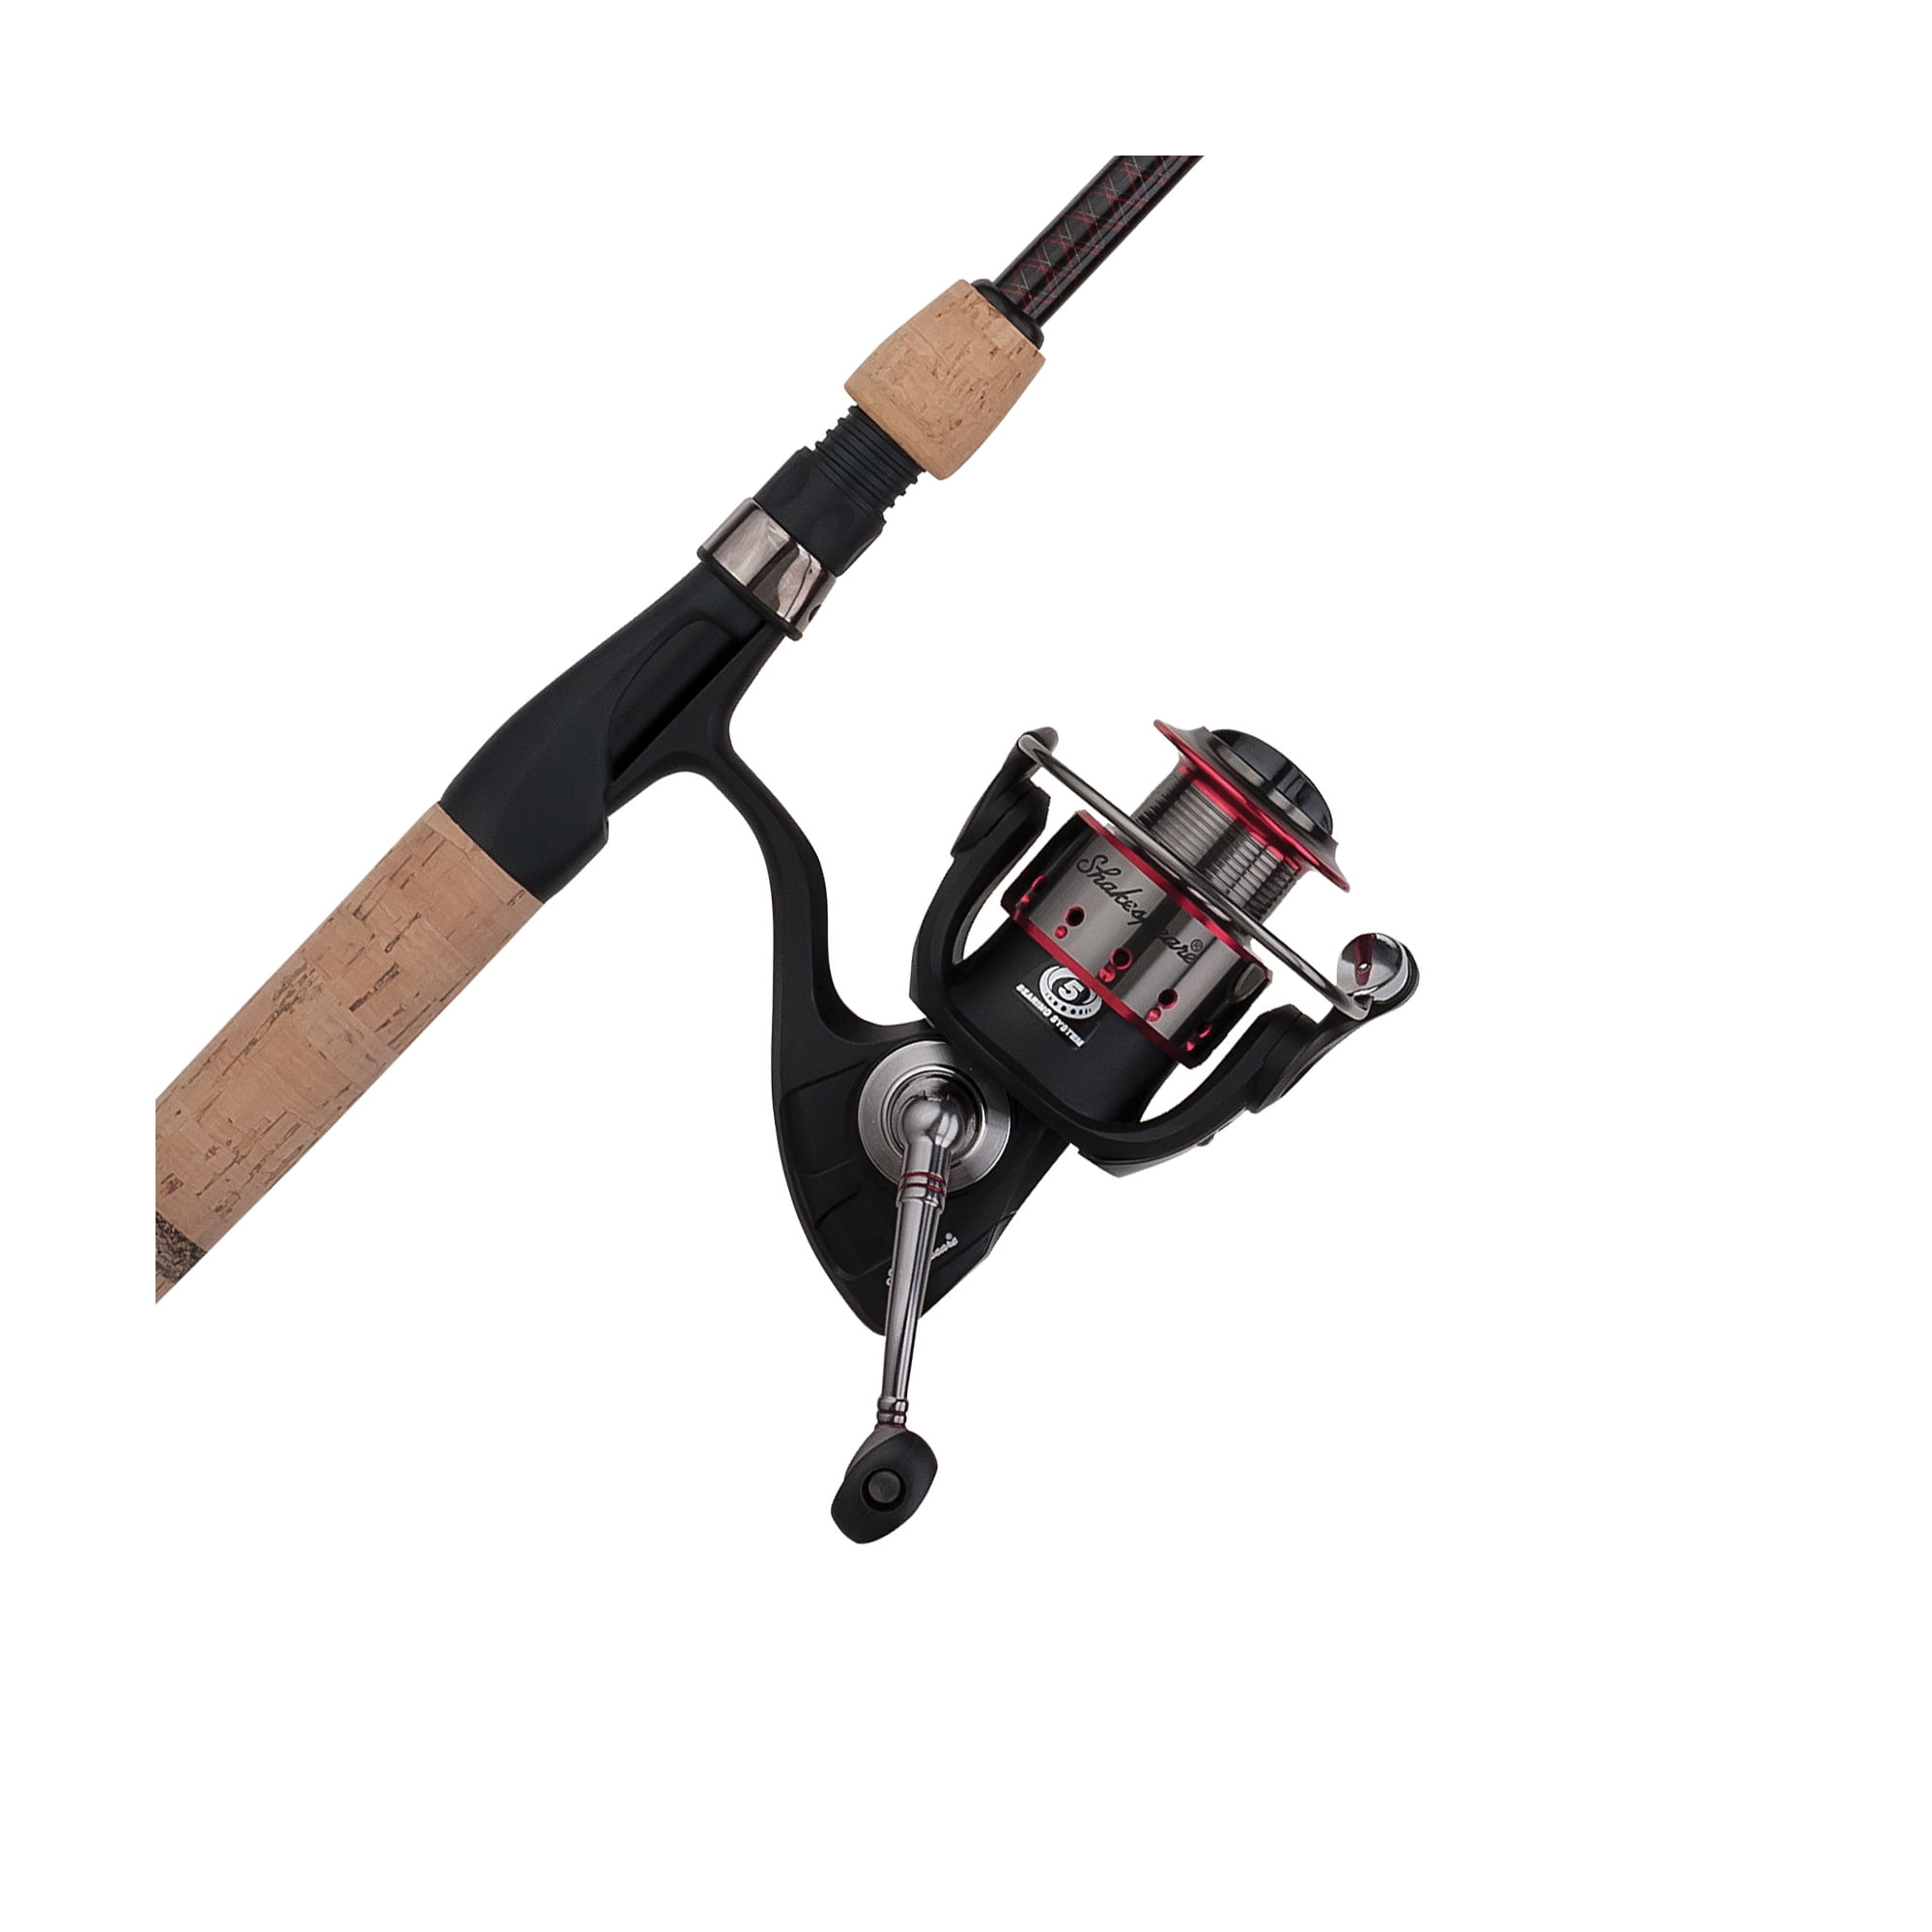 Ugly Stik 5' Elite Spinning Fishing Rod and Reel Spinning Combo